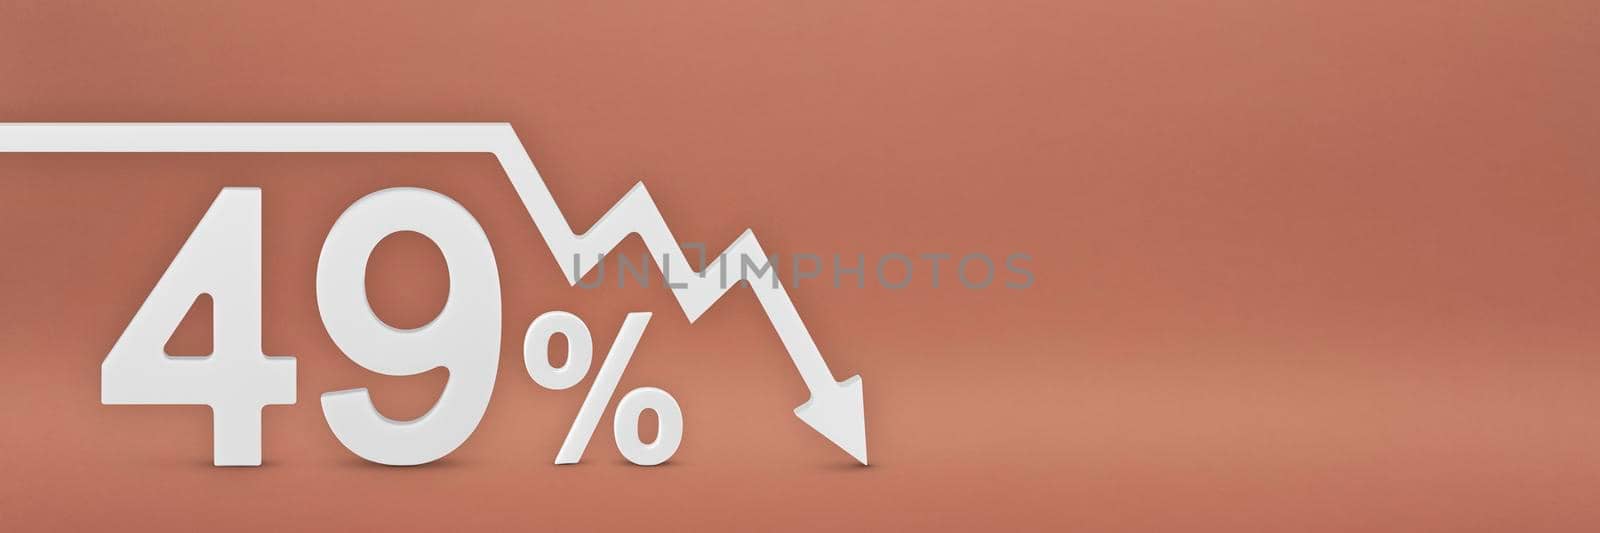 forty-nine percent, the arrow on the graph is pointing down. Stock market crash, bear market, inflation.Economic collapse, collapse of stocks.3d banner,49 percent discount sign on a red background